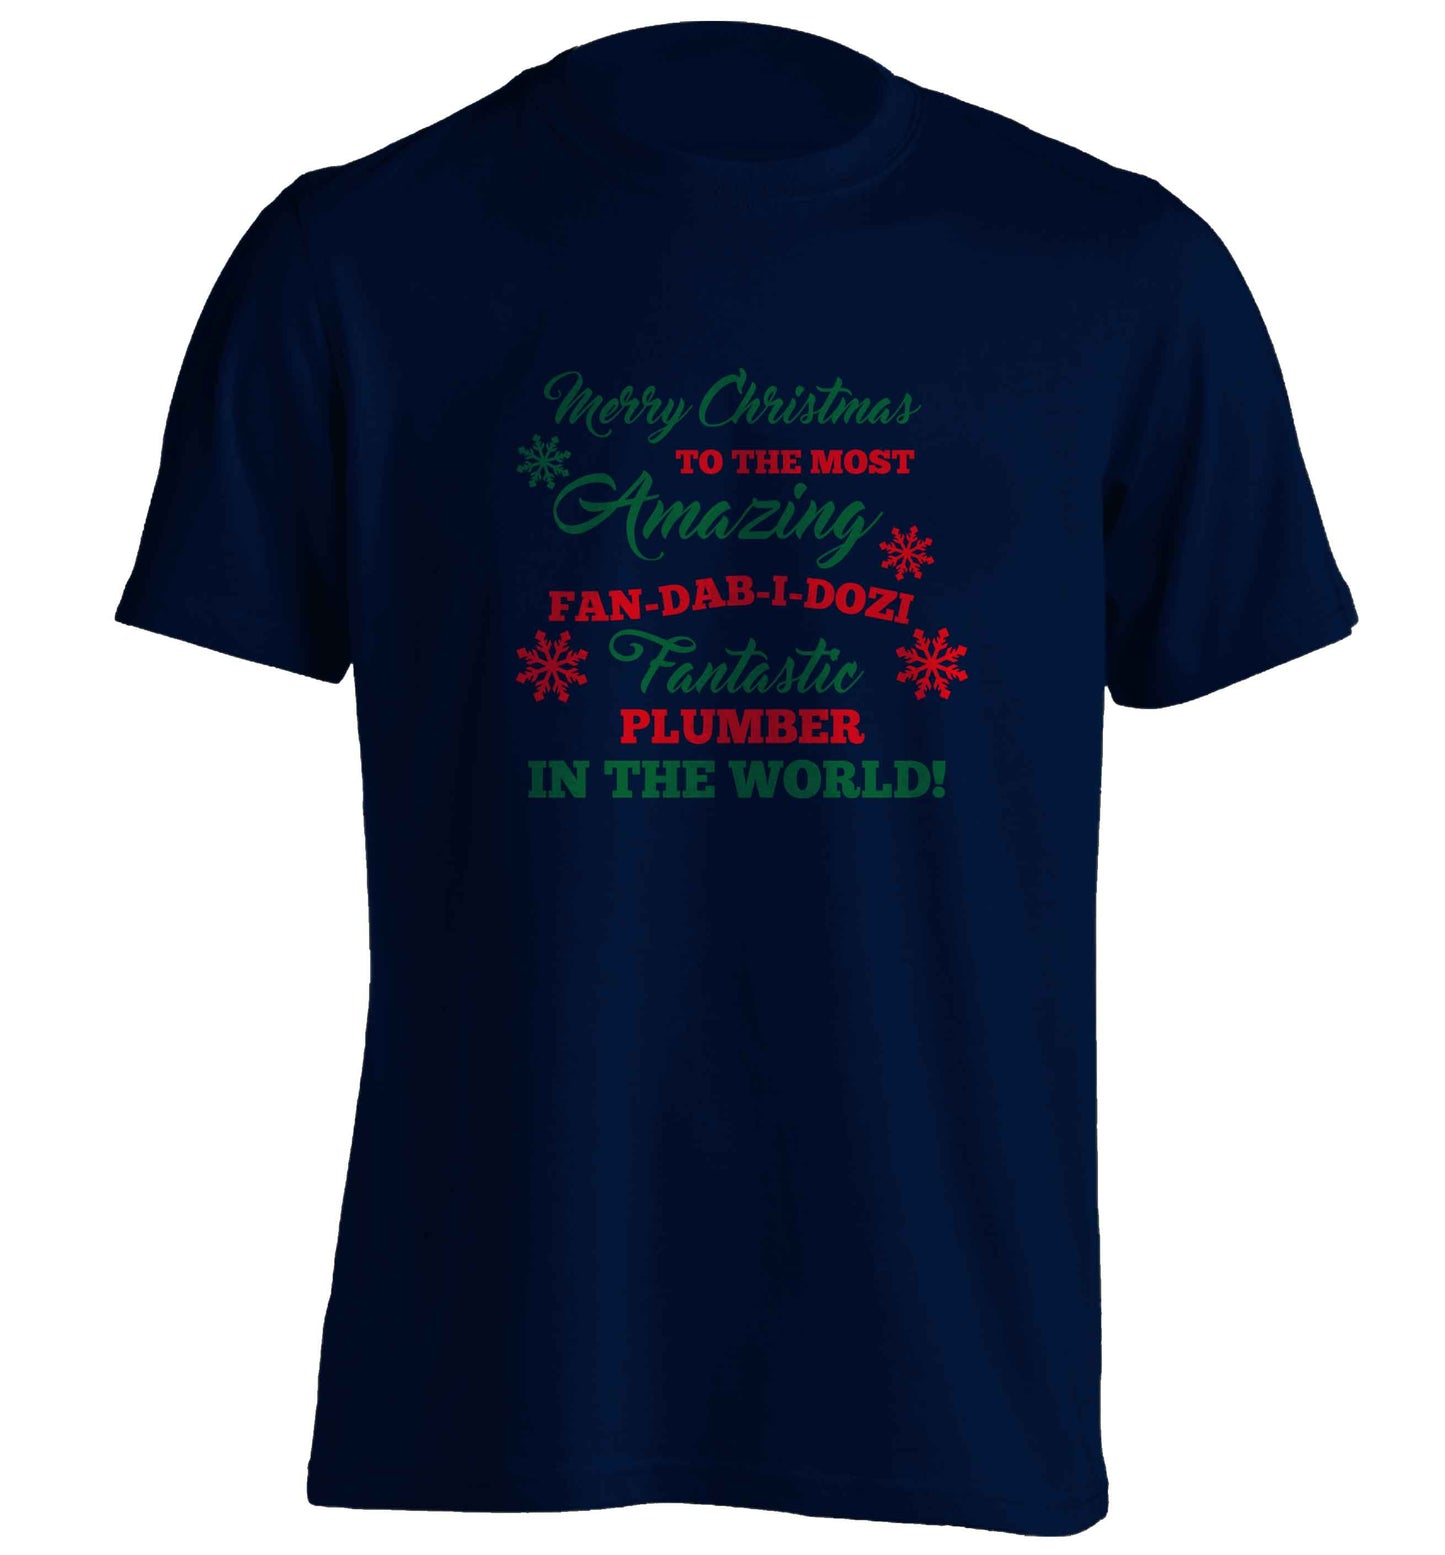 Merry Christmas to the most amazing plumber in the world! adults unisex navy Tshirt 2XL